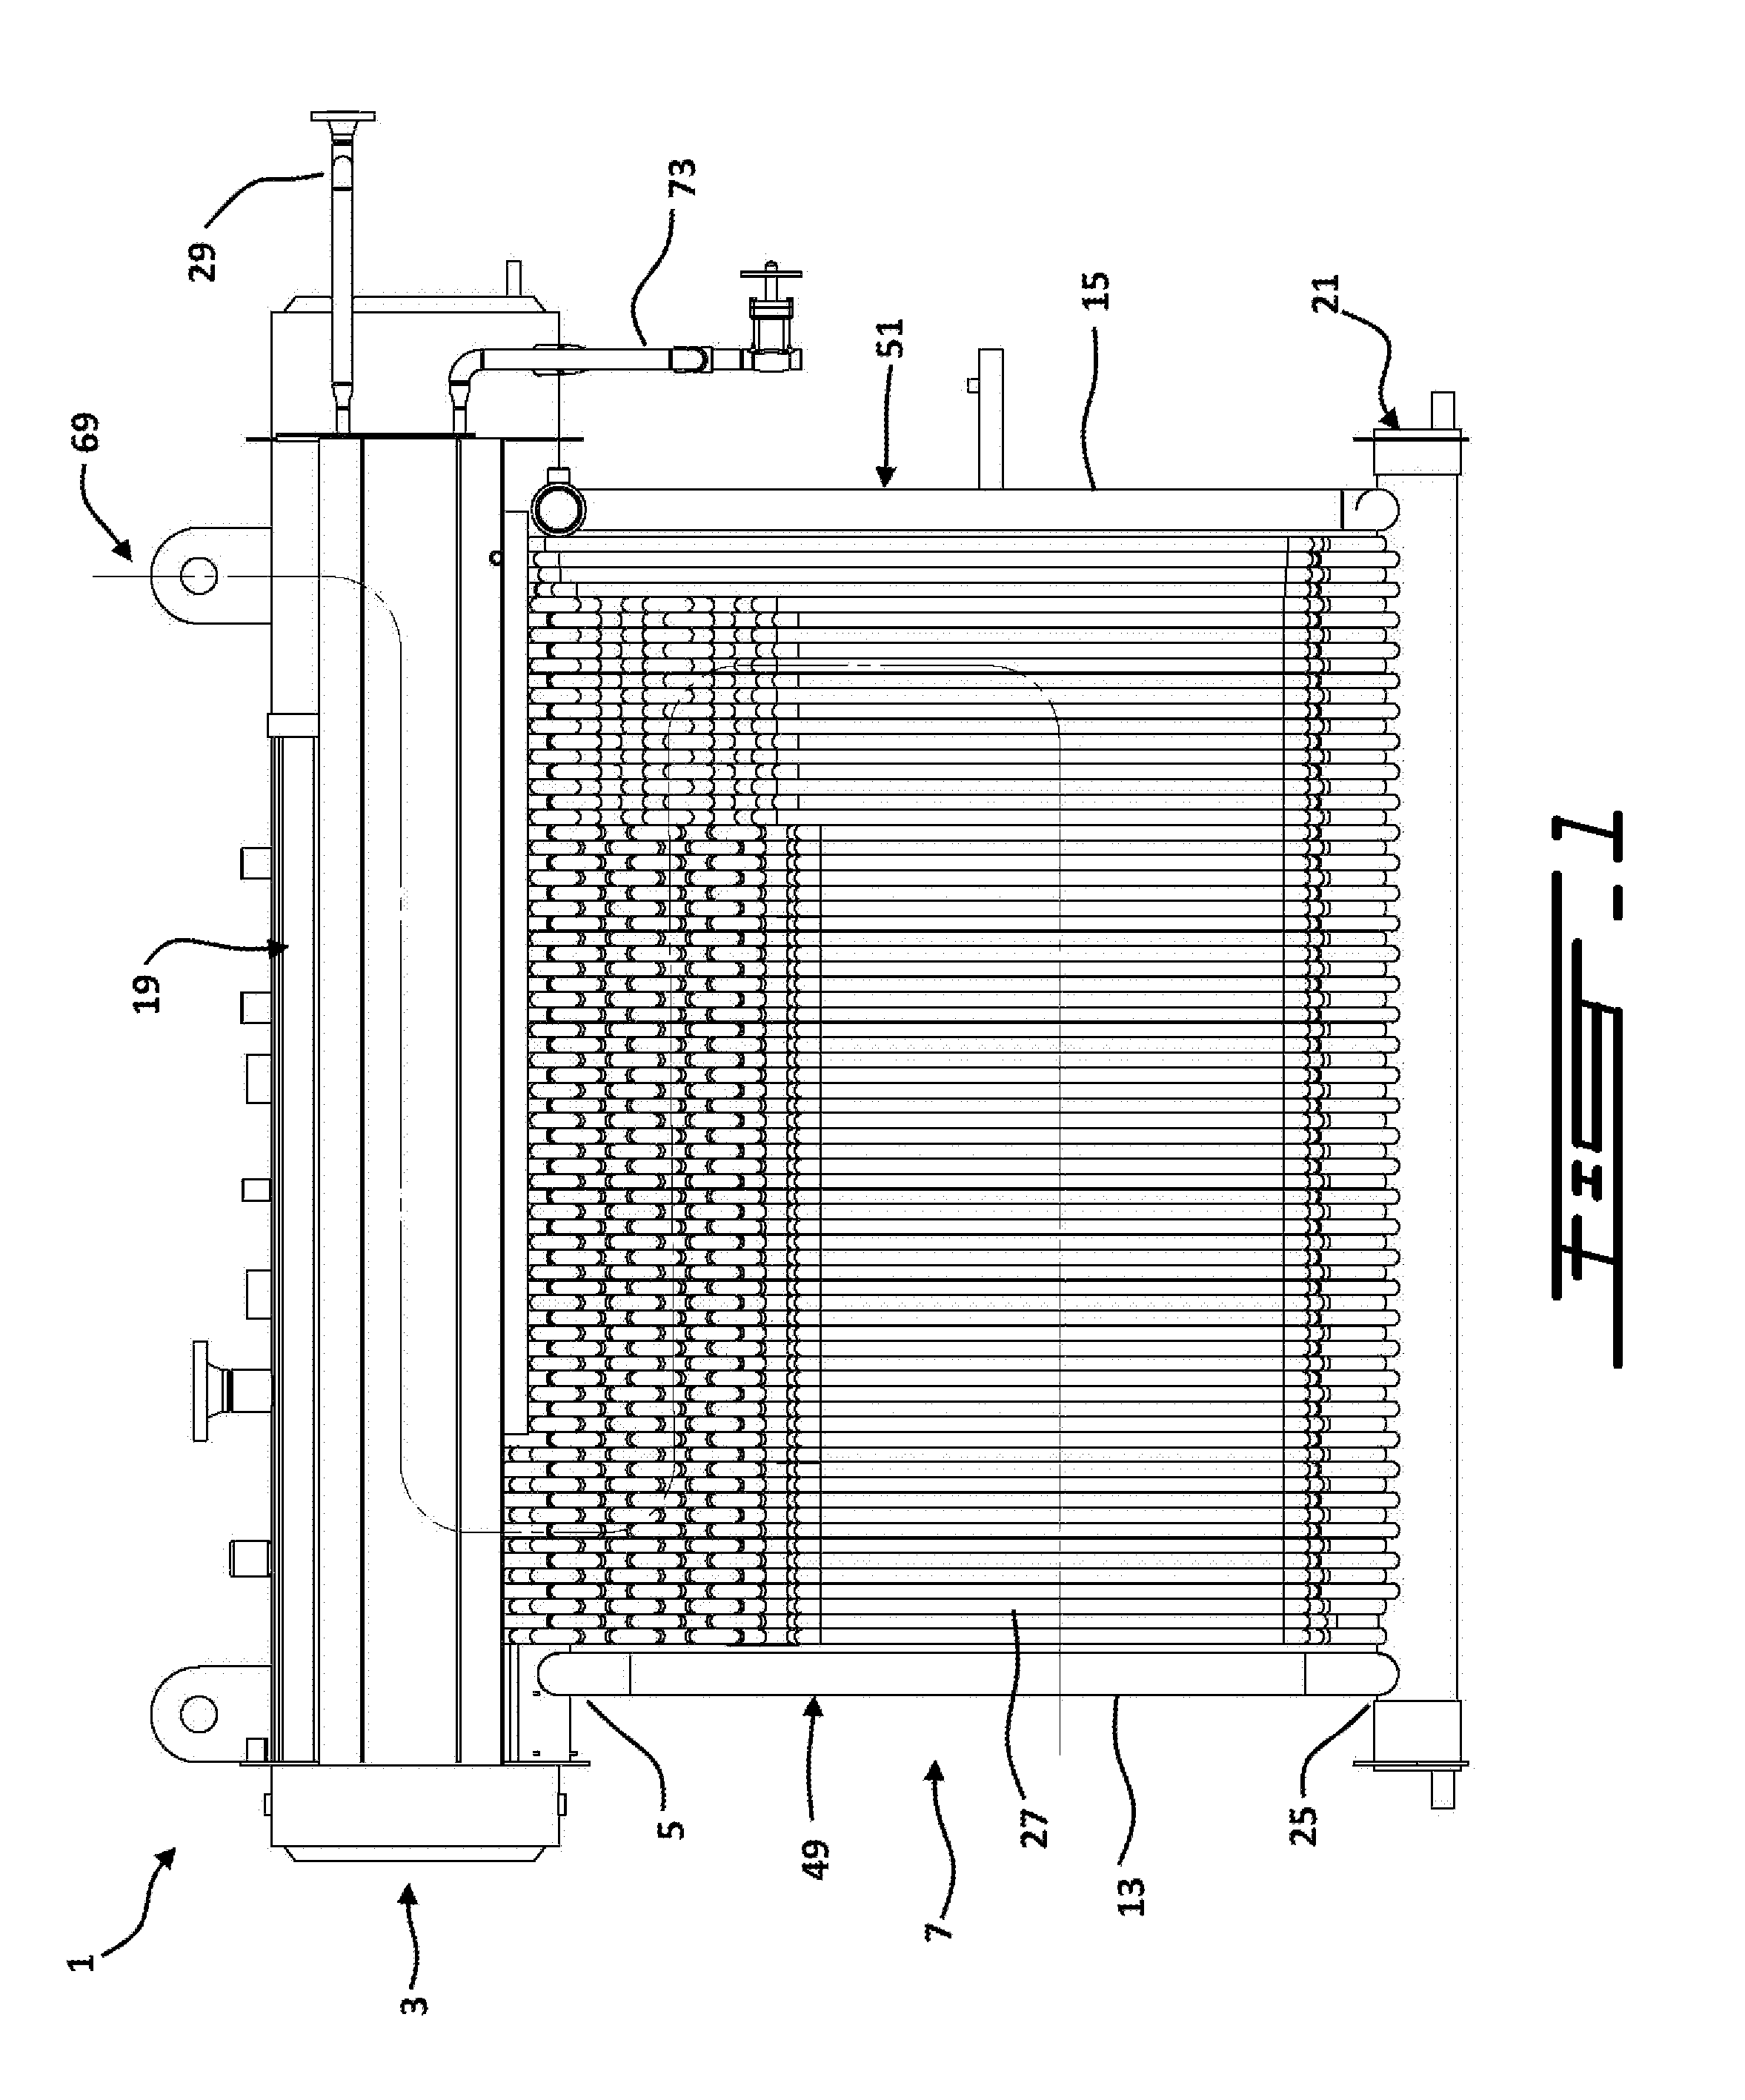 Boiler System Comprising an Integrated Economizer